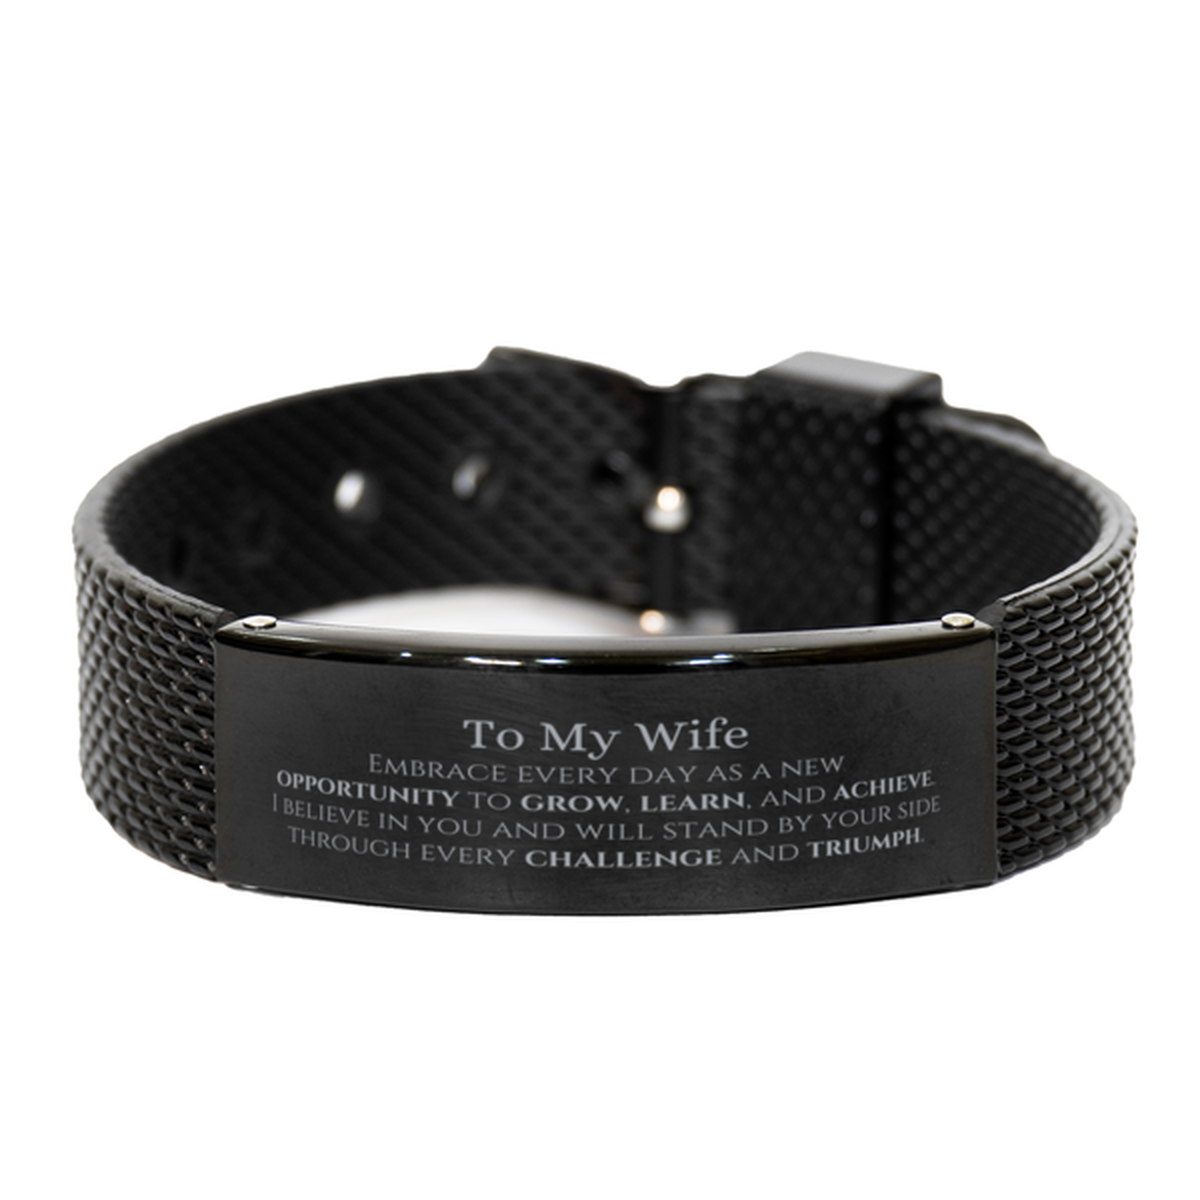 To My Wife Gifts, I believe in you and will stand by your side, Inspirational Black Shark Mesh Bracelet For Wife, Birthday Christmas Motivational Wife Gifts